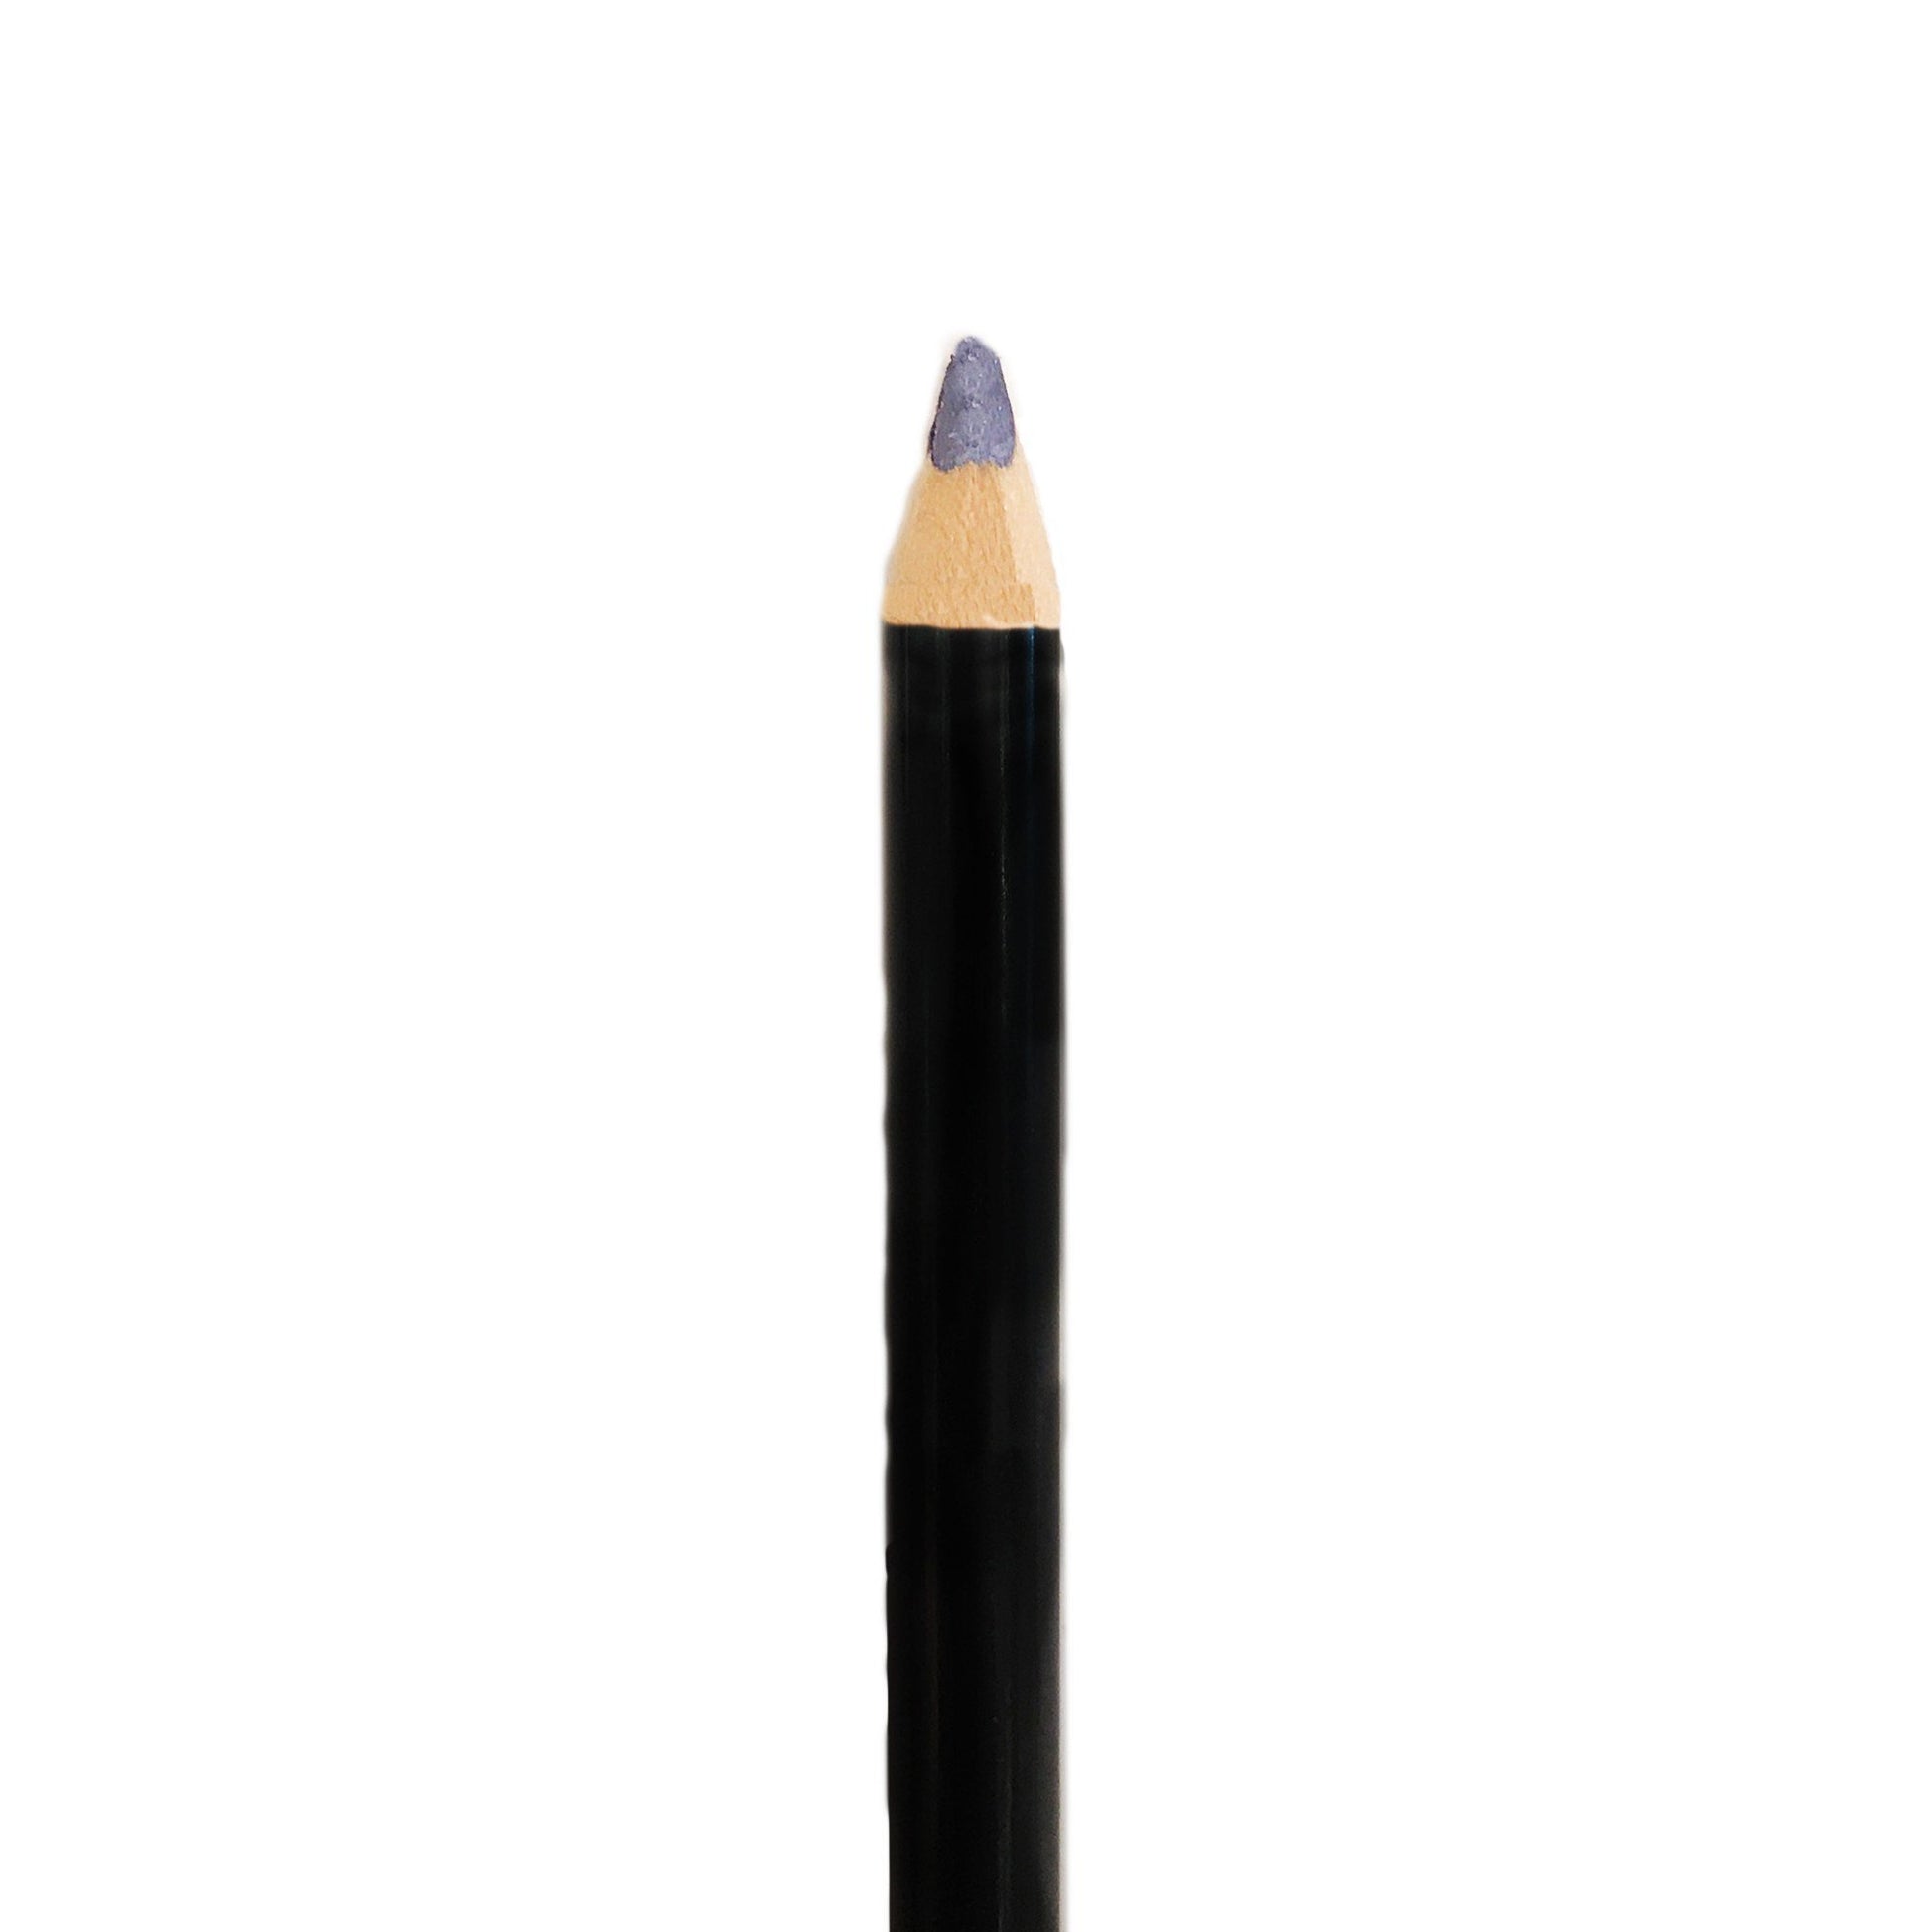 Lilac Eye Liner Pencil ready for your name by Indigo Private Label Cosmetics